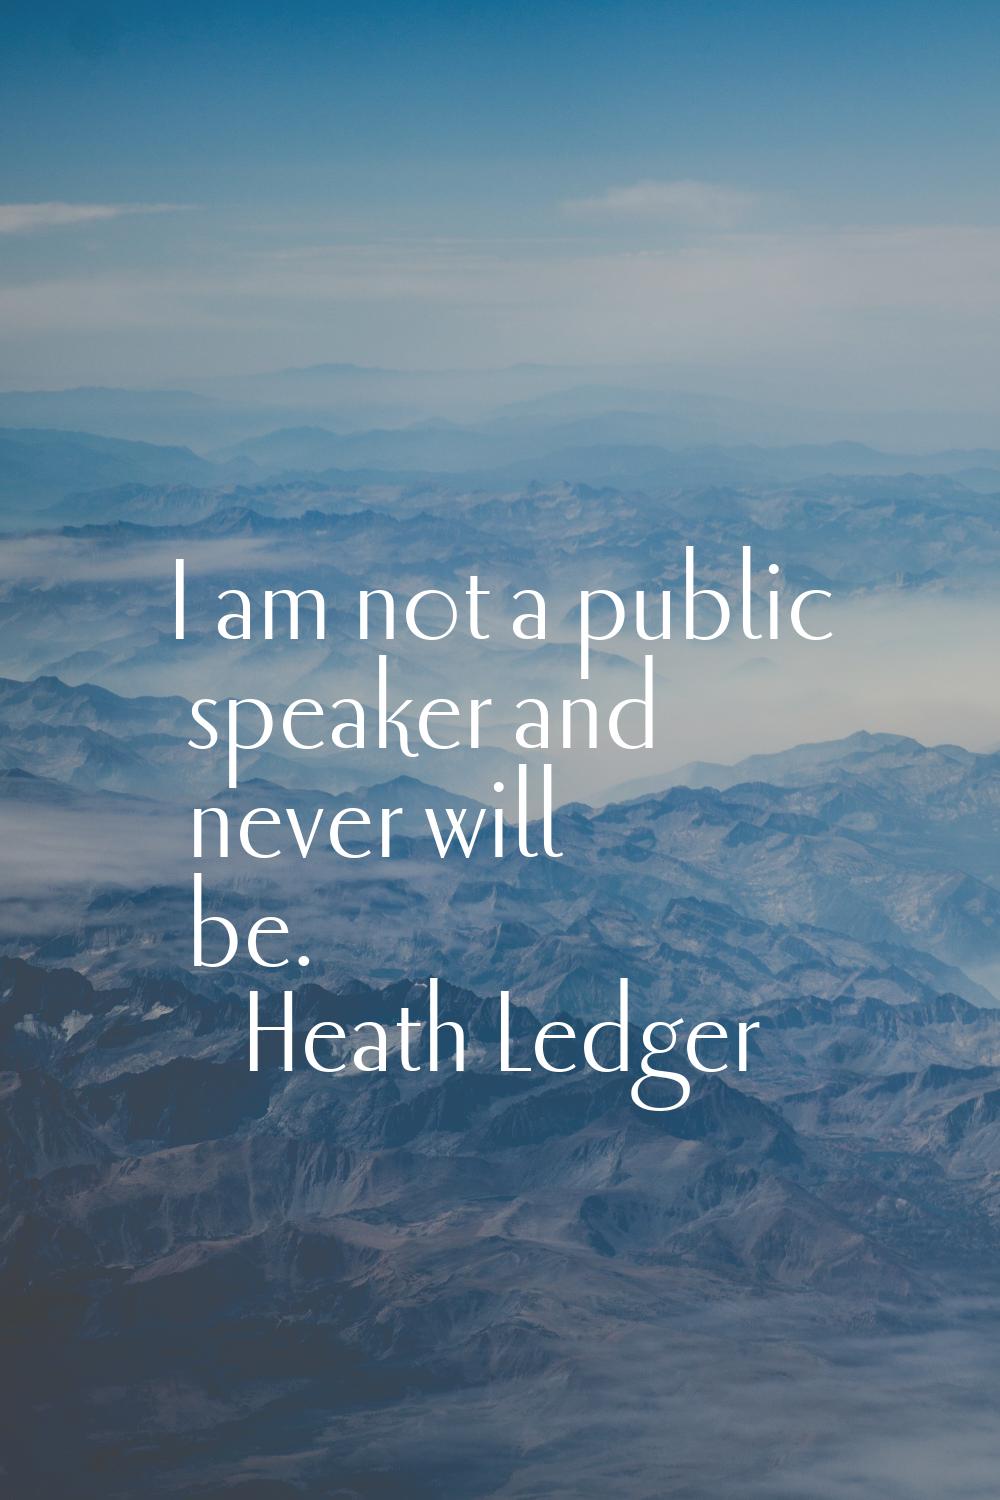 I am not a public speaker and never will be.